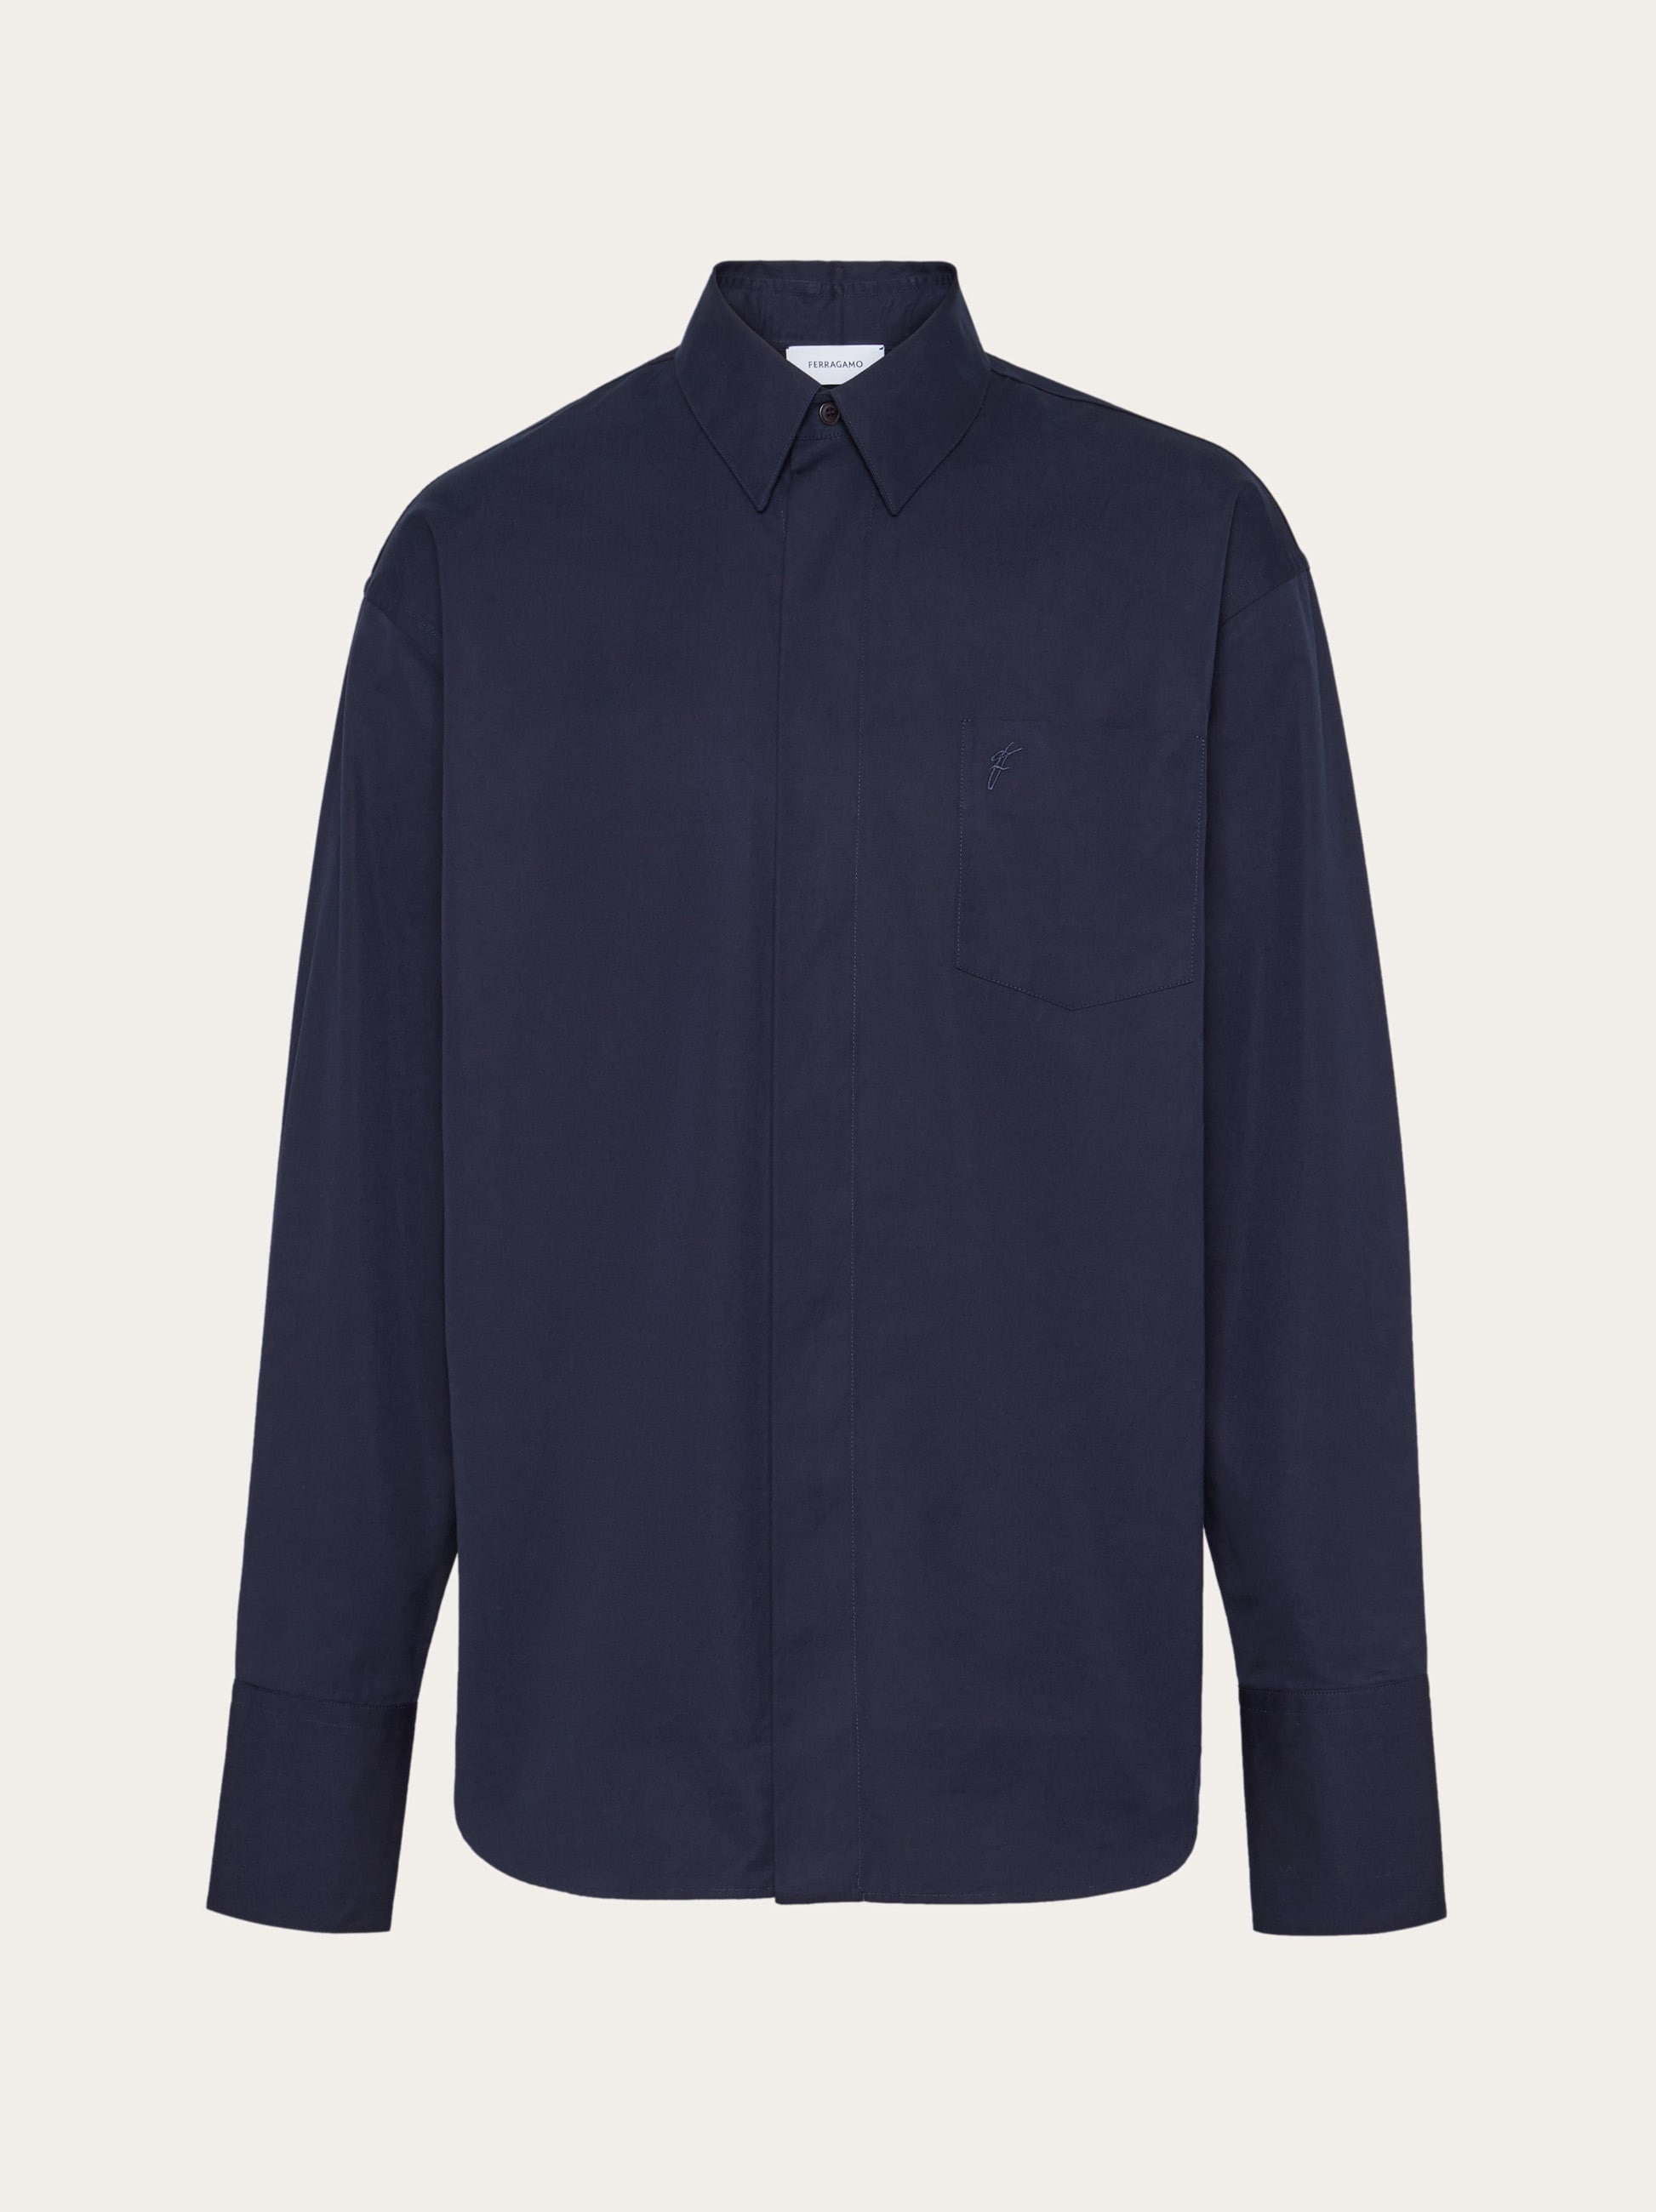 Sports shirt with applied pockets - 1